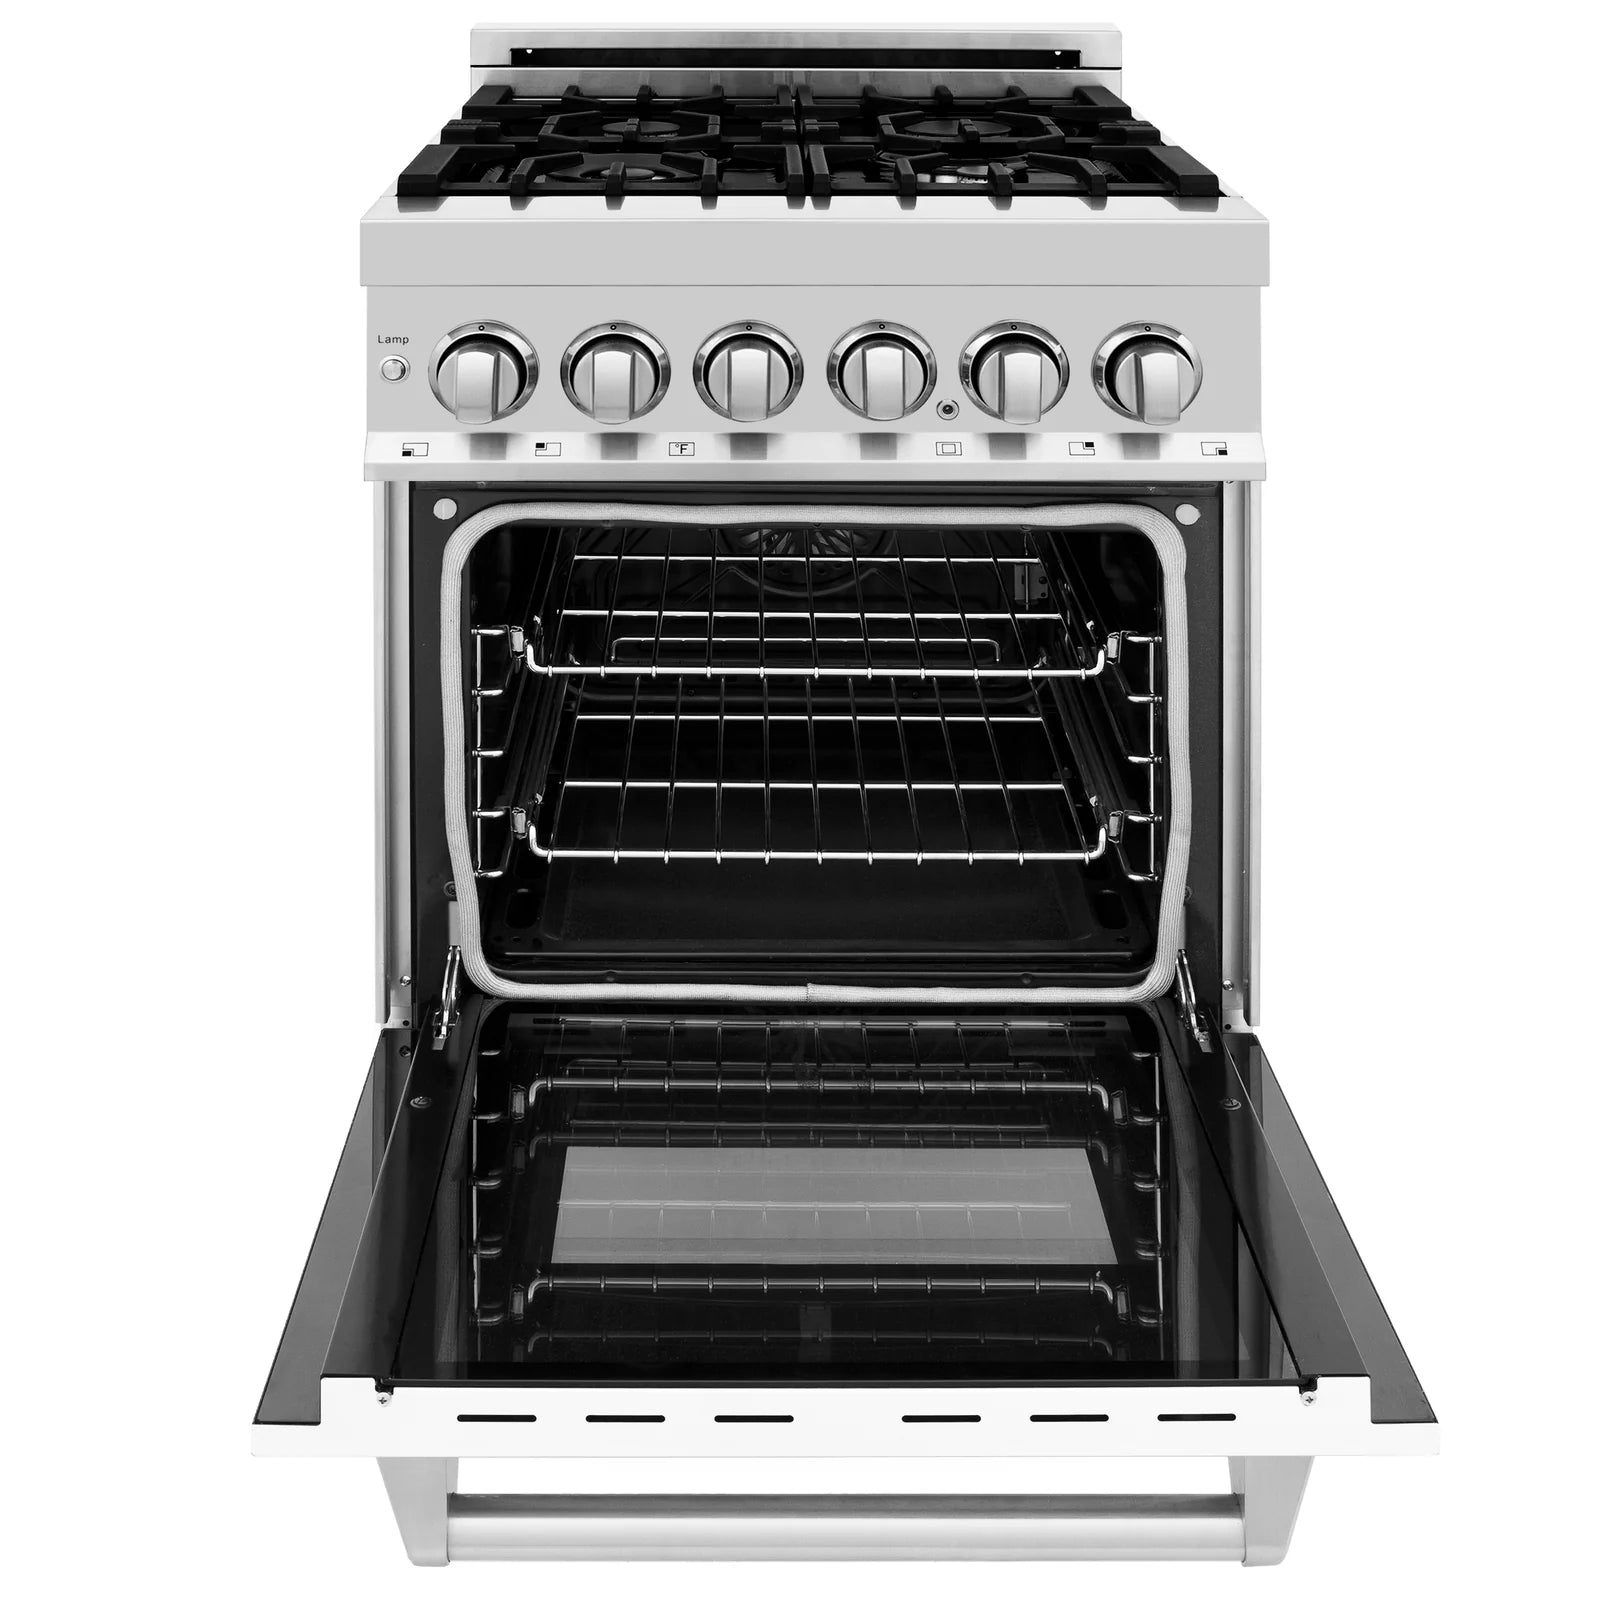 ZLINE 24-Inch 2.8 cu. ft. Electric Oven and Gas Cooktop Dual Fuel Range with Griddle and White Matte Door in Stainless Steel - RA-WM-GR-24